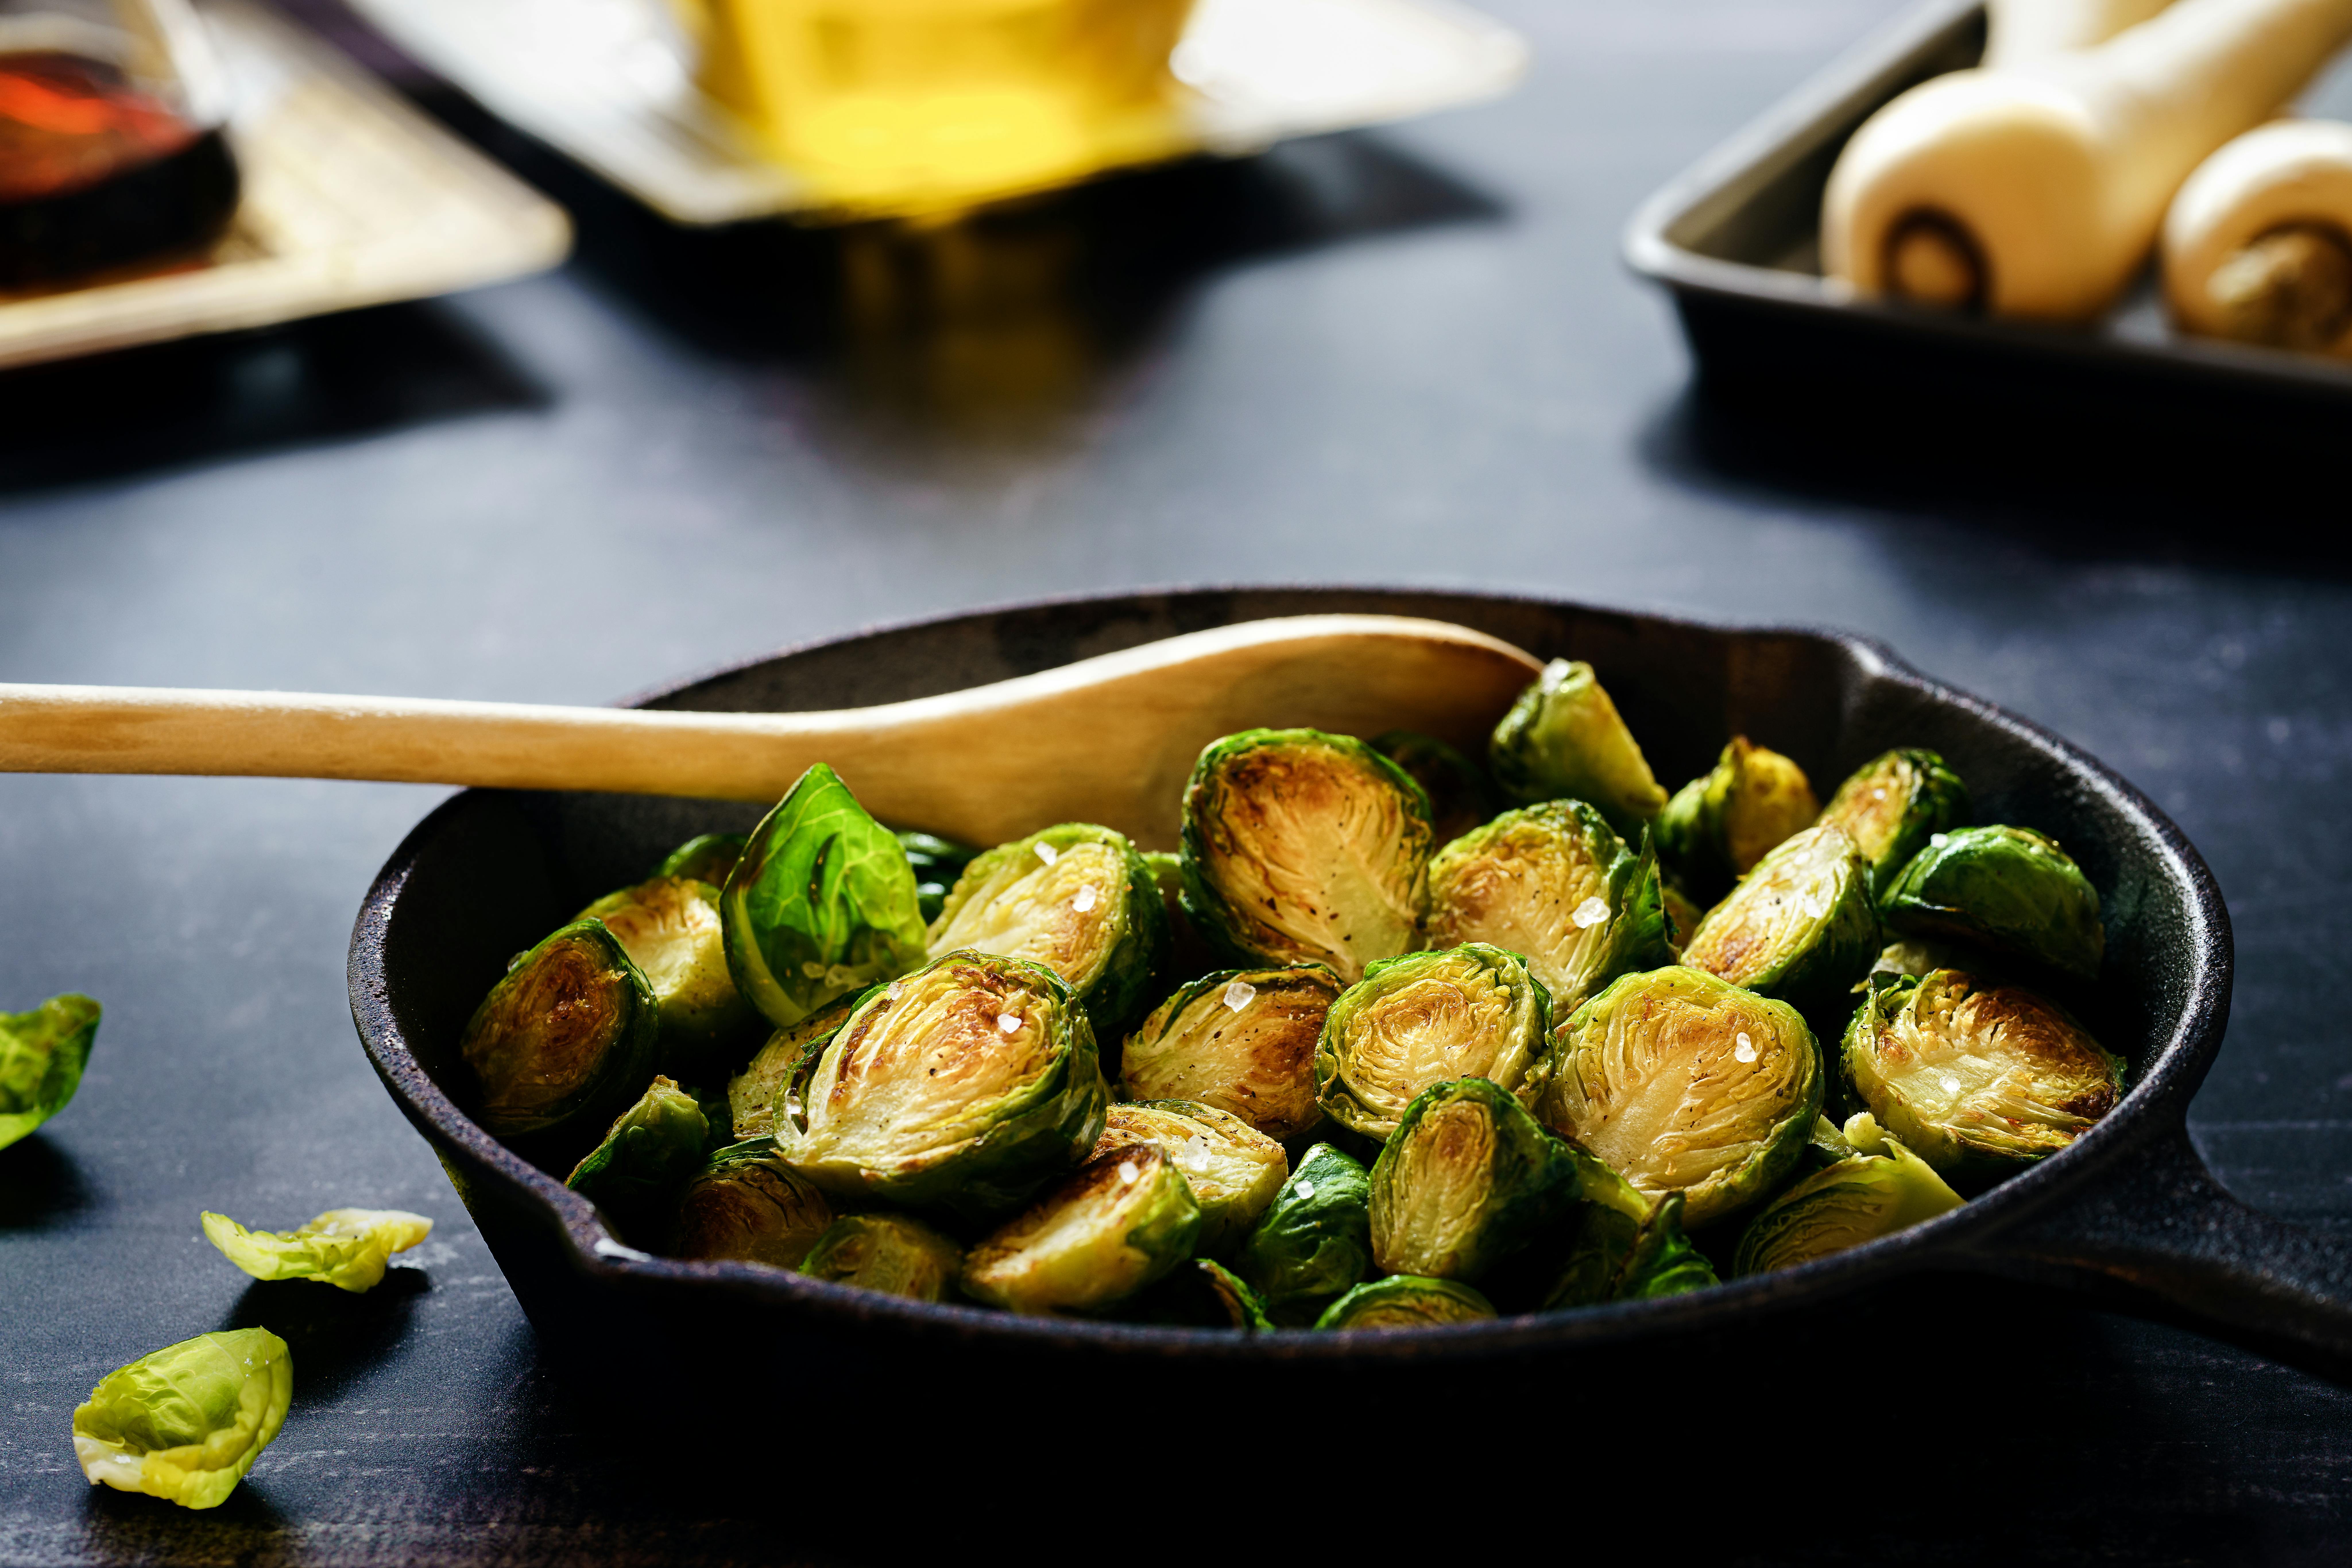 This cast iron set from Member's Mark is one of the best cookware sets for gas stove cooking. Pictured: Brussel sprouts in a cast iron pan